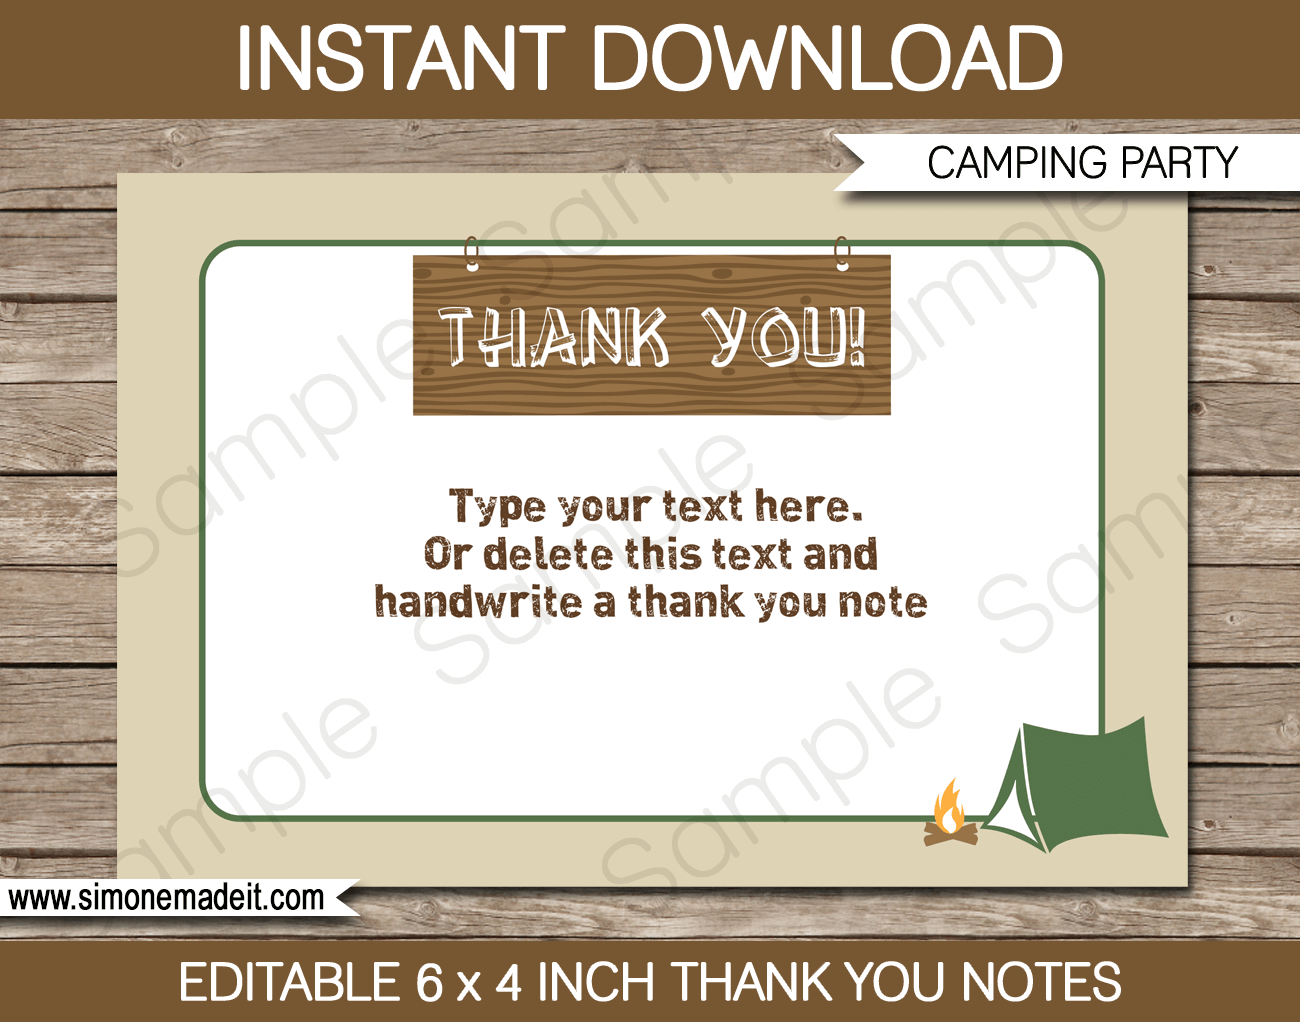 Printable Camping Party Thank You Cards - Favor Tags - Camp or Camping Birthday Party theme - Editable Template - Instant Download via simonemadeit.com